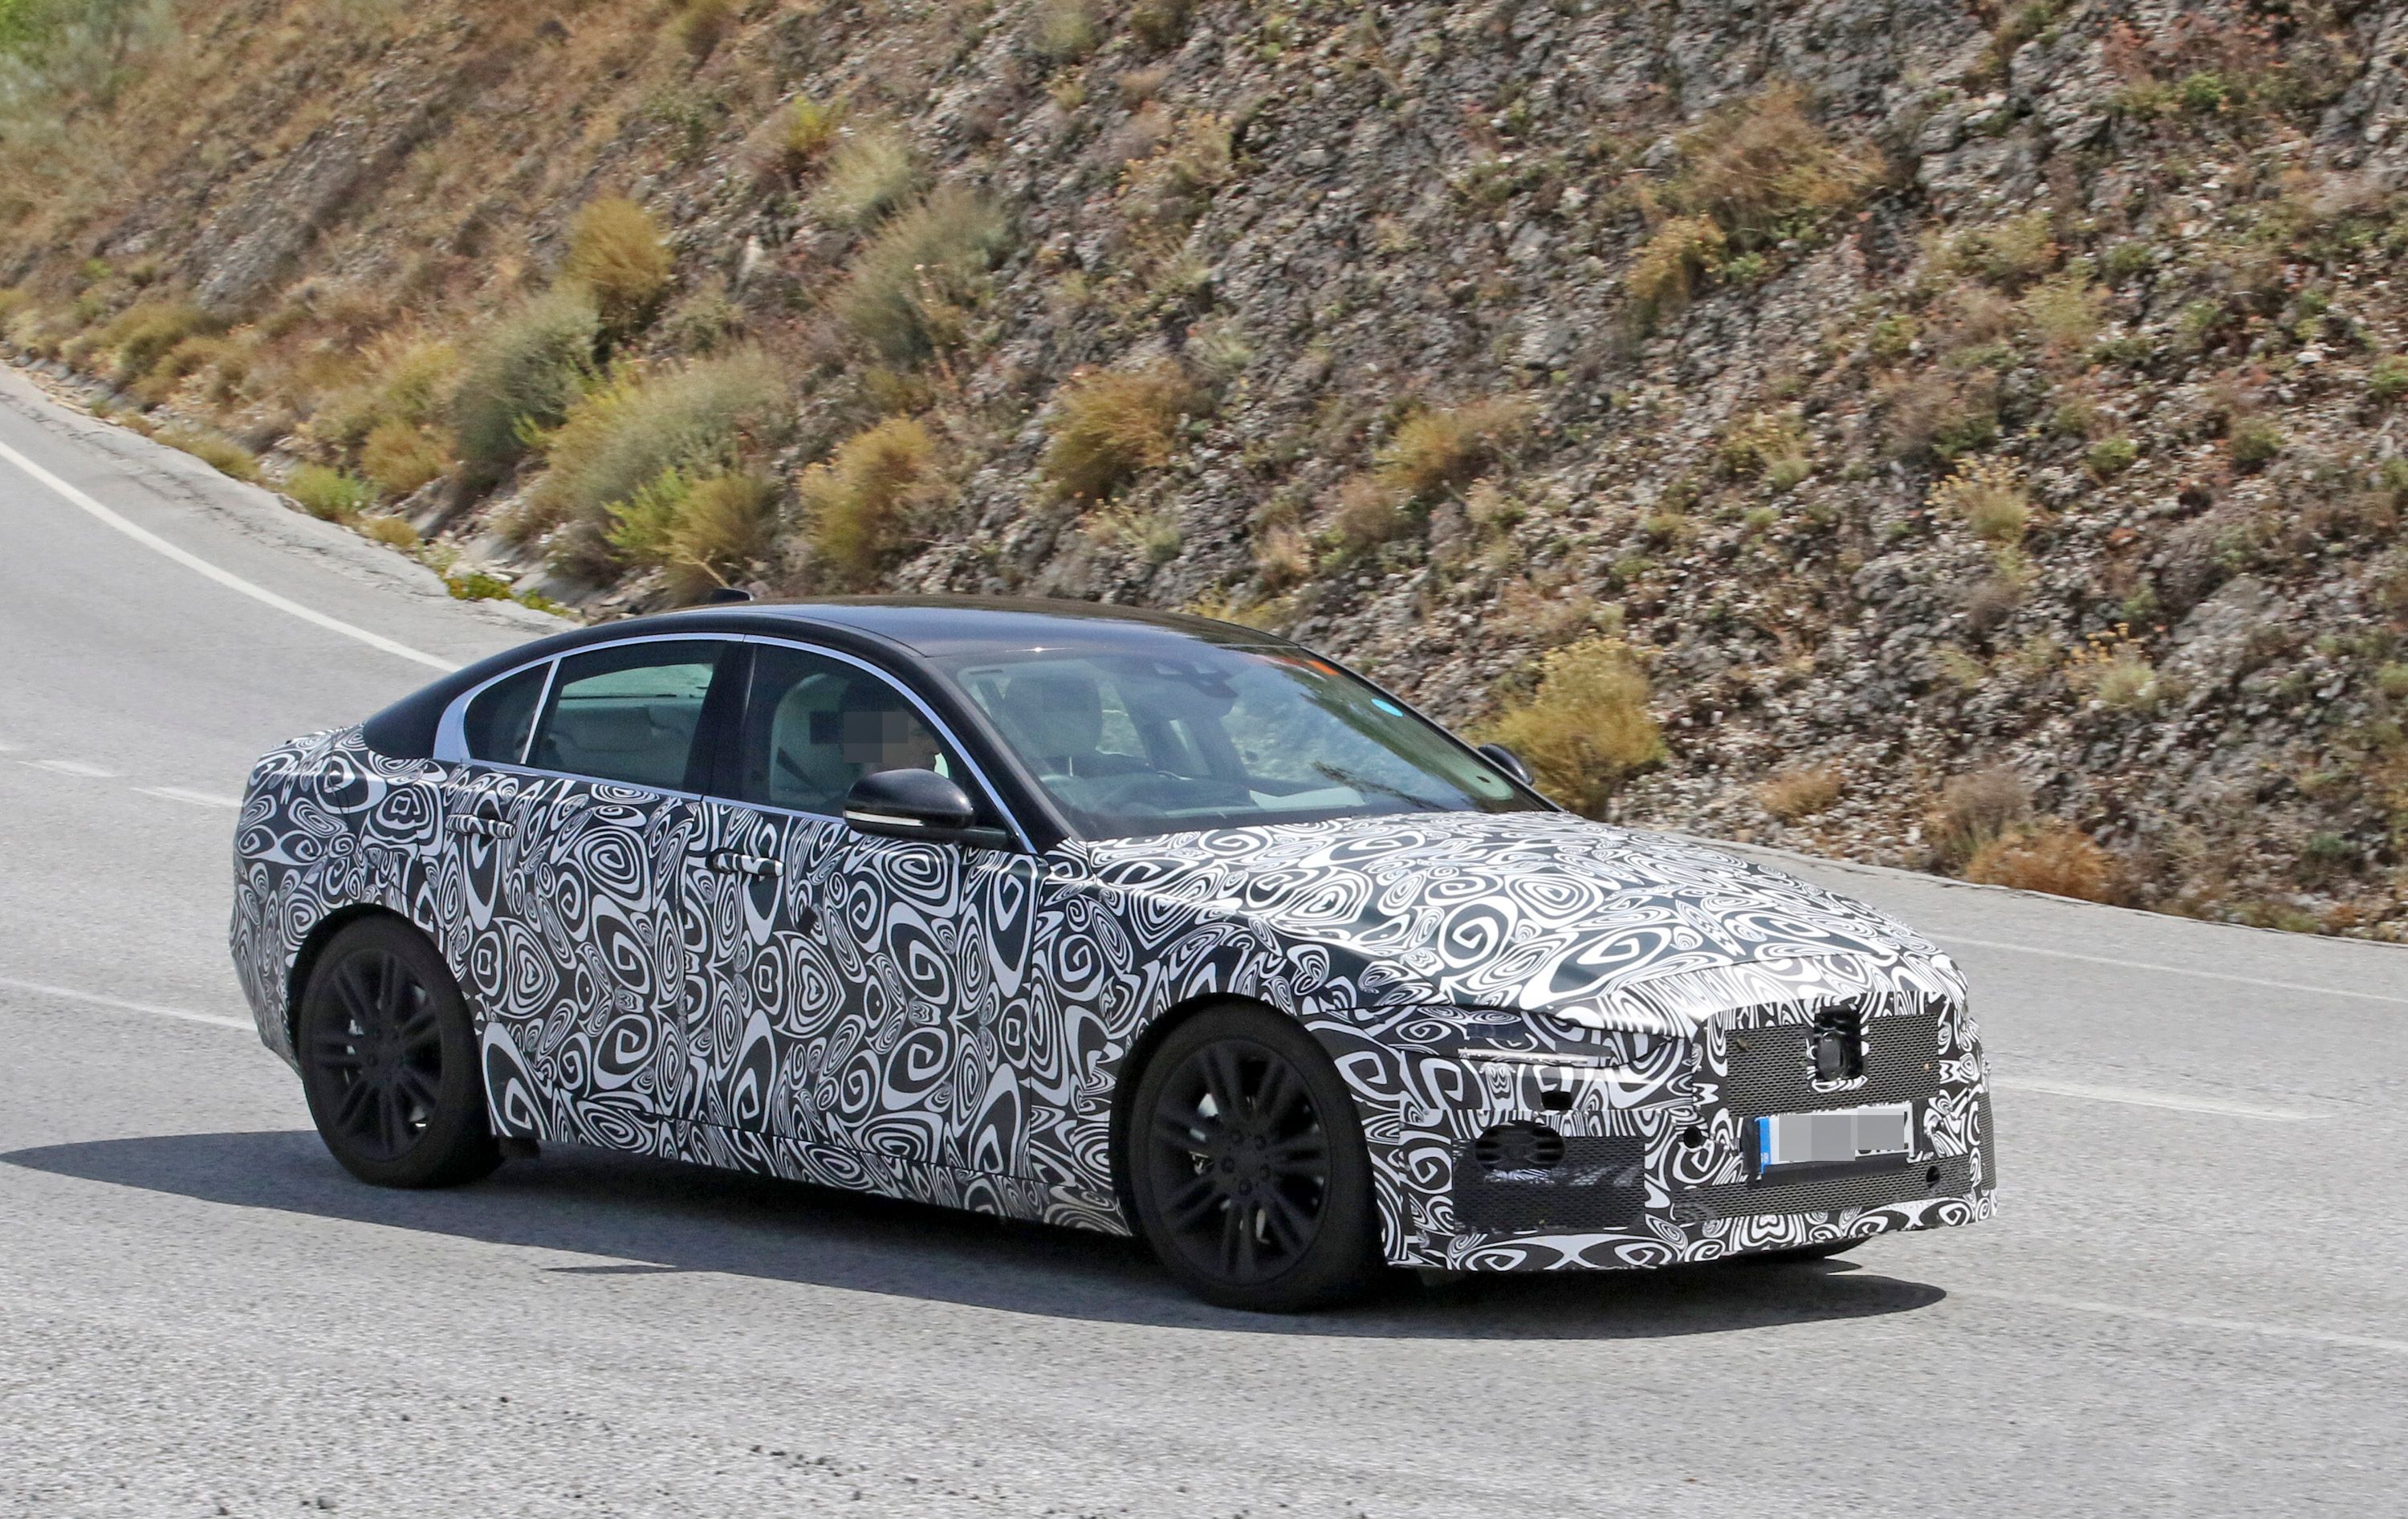 1988 The 2019 BMW 3 Series is here but these 2020 Jaguar XE Spy Shots Promise it Won't Go Unopposed